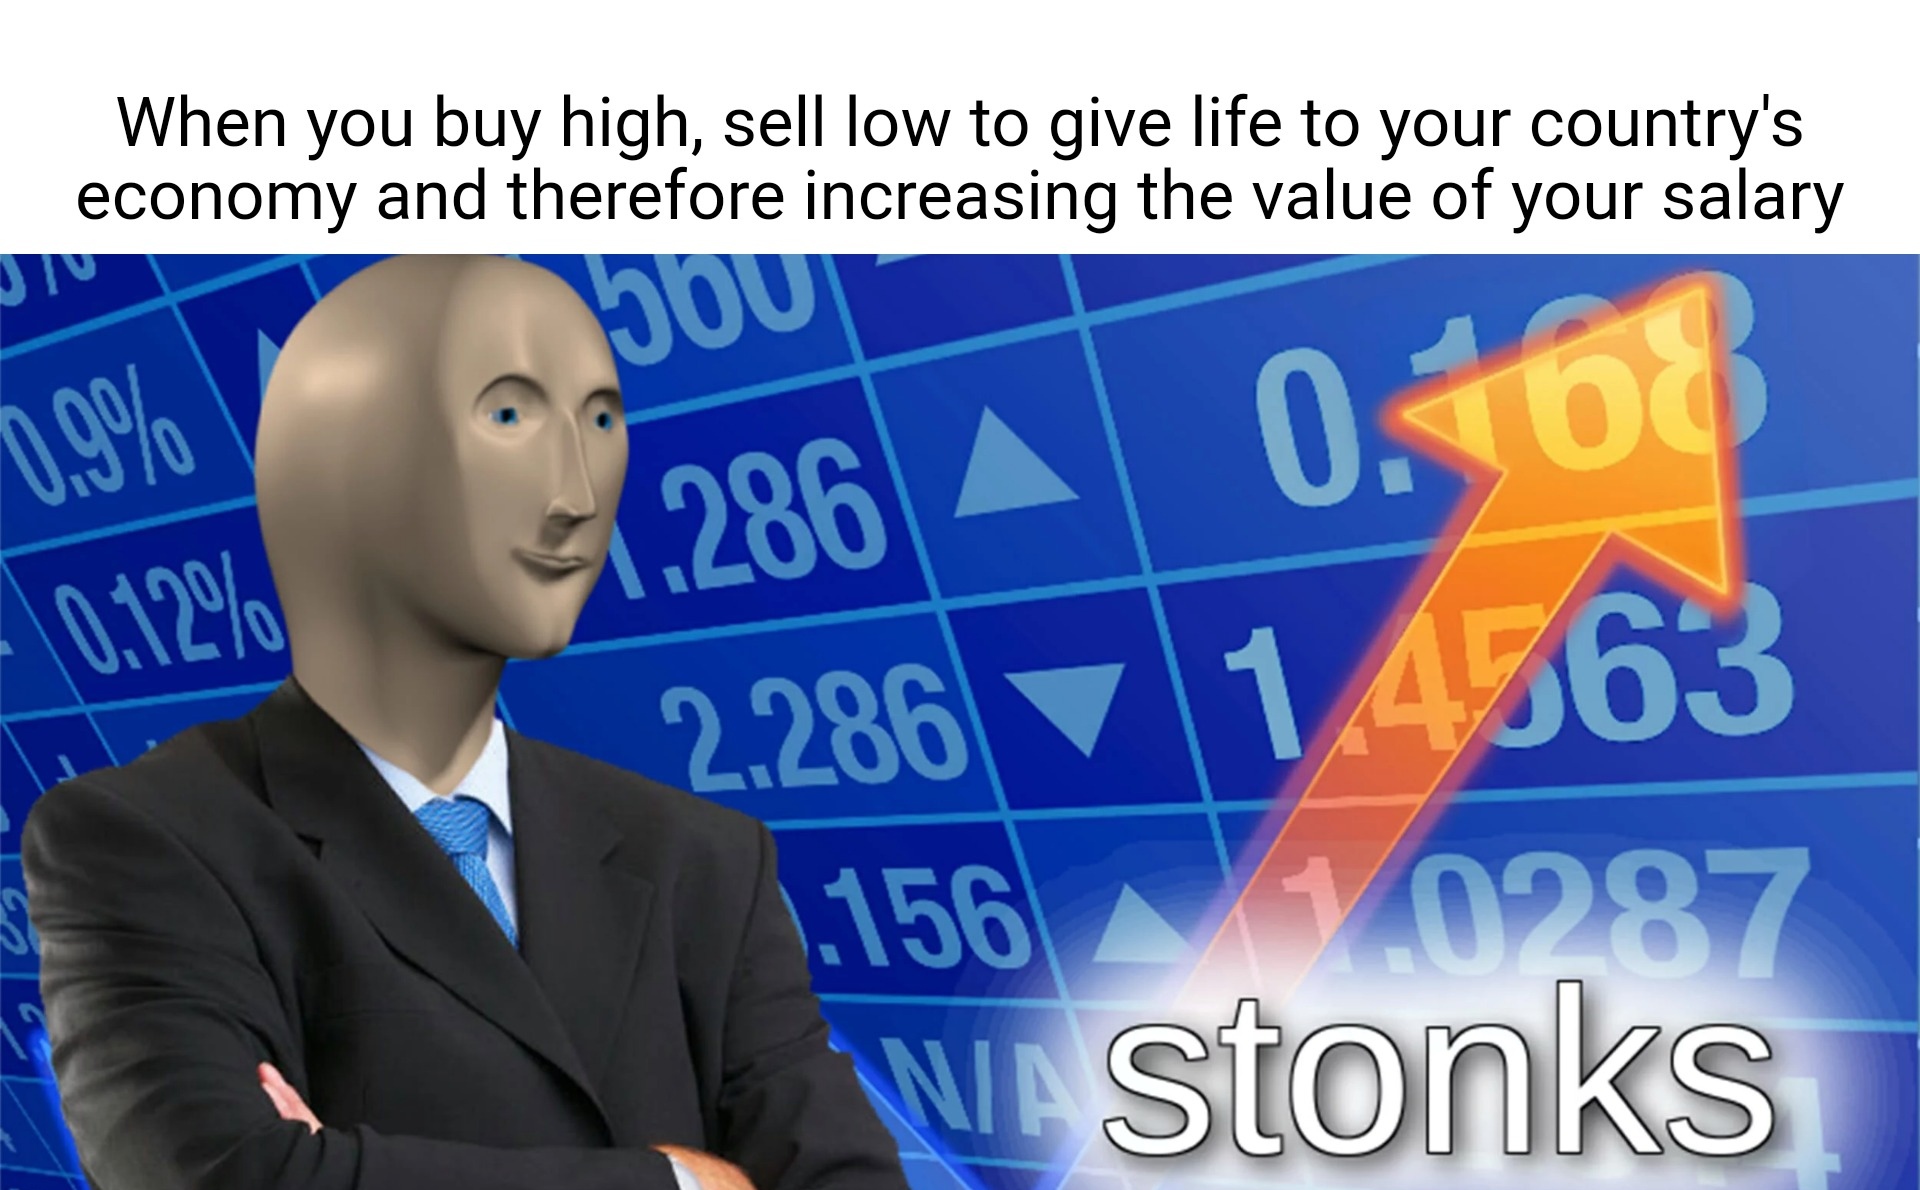 dank memes - big stonks - When you buy high, sell low to give life to your country's economy and therefore increasing the value of your salary 0.9% 1.286 0.10E 1.4563 0.12% 2.286 .156 1.0287 Wastonks